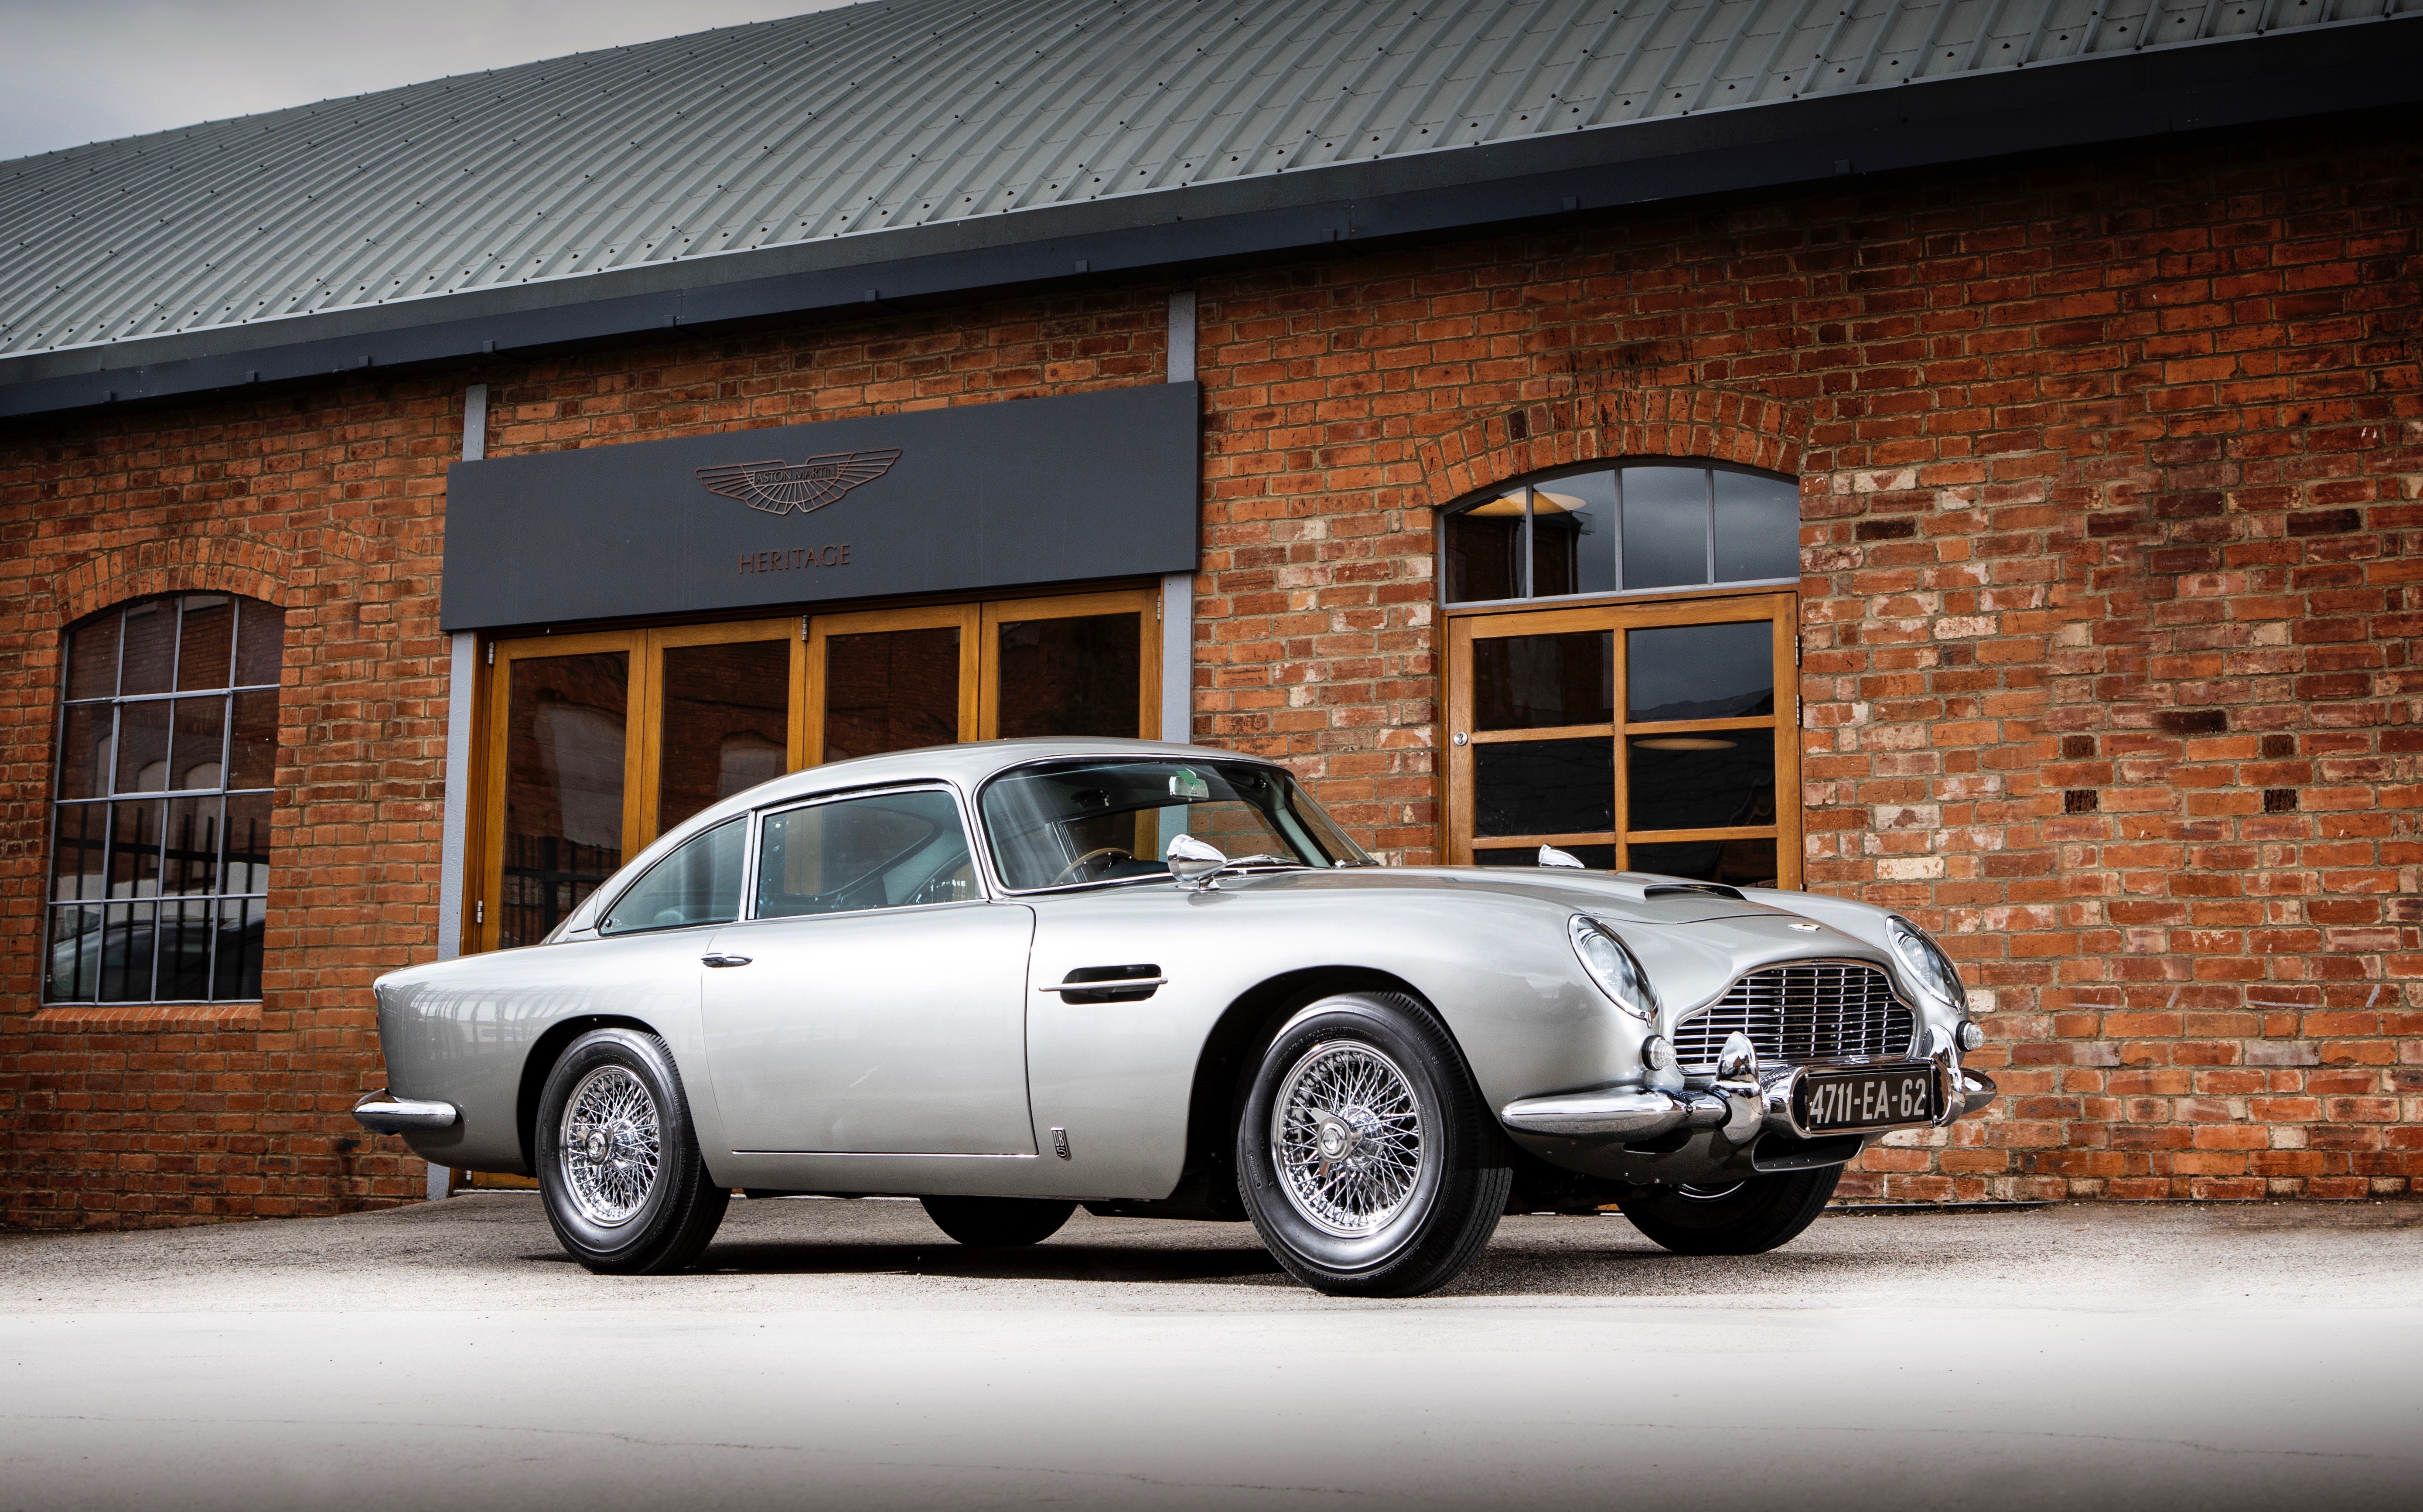 007 Aston Martin, 007 DB5 movie promo car heading to RM Sotheby’s Monterey auction, ClassicCars.com Journal